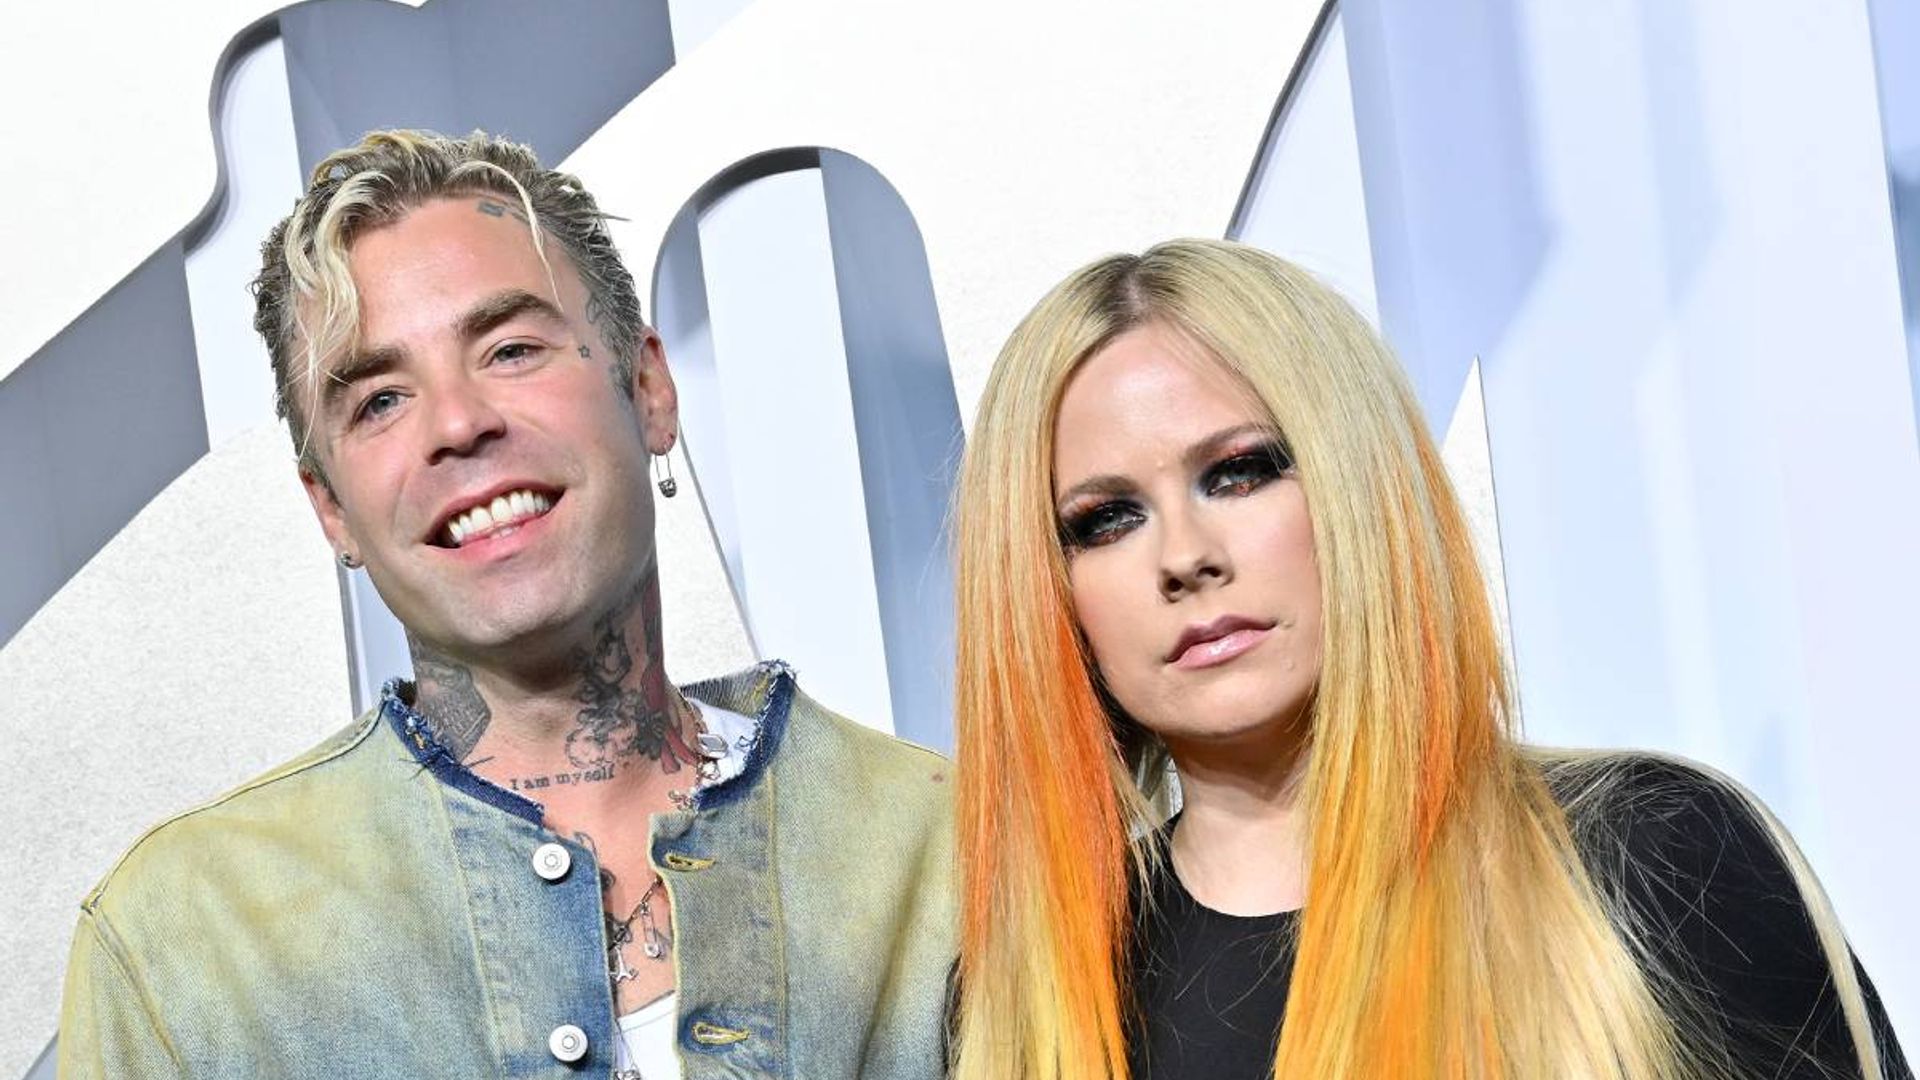 Mod Sun Releases New Music After End of Engagement to Avril Lavigne